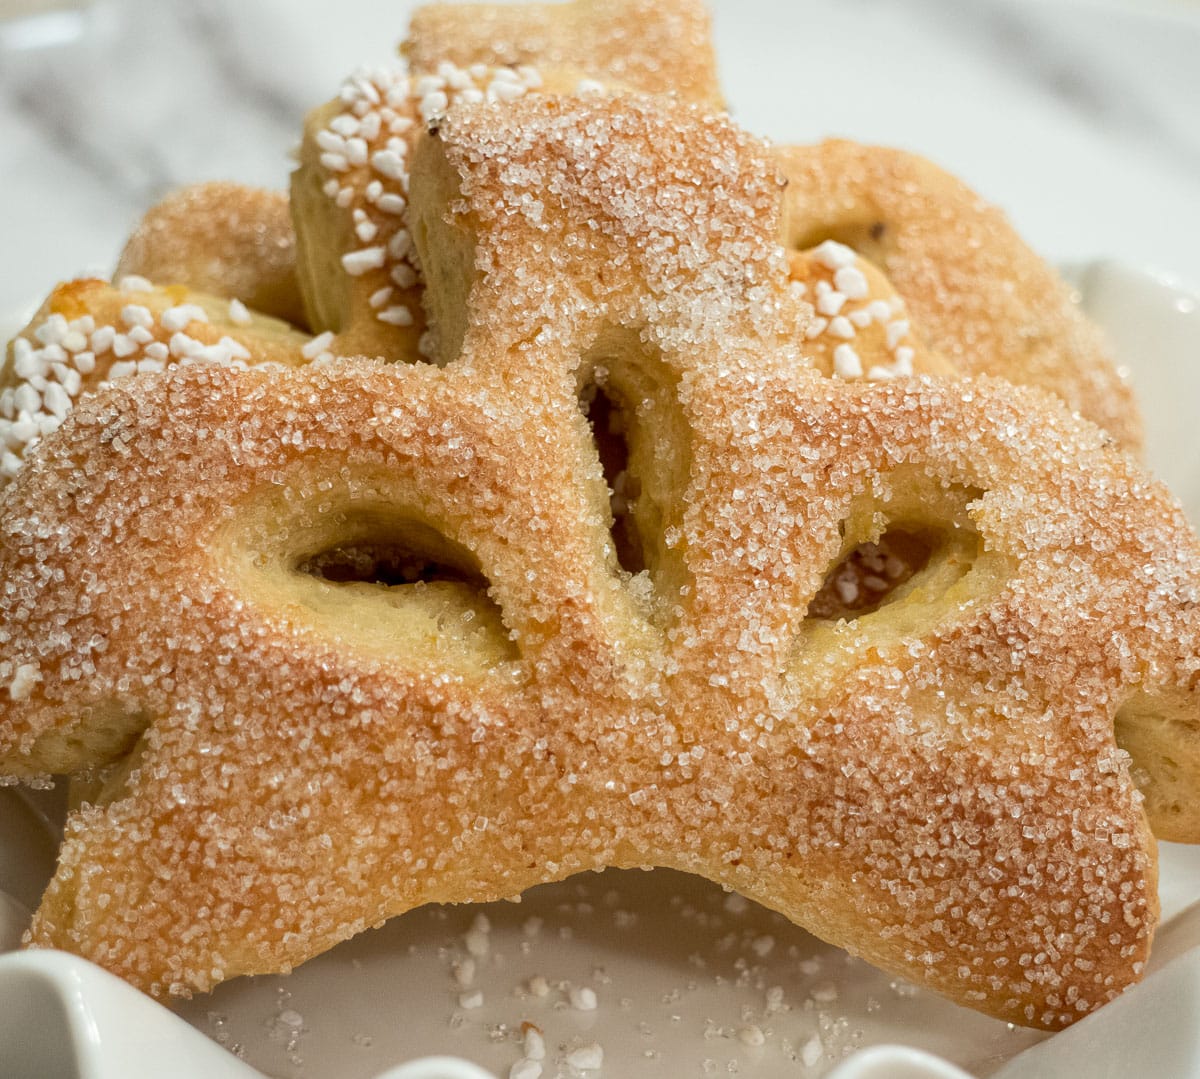 This Gibassier which sits on a white plate is a French breakfast sweet roll in the shape of a fleur de lis.